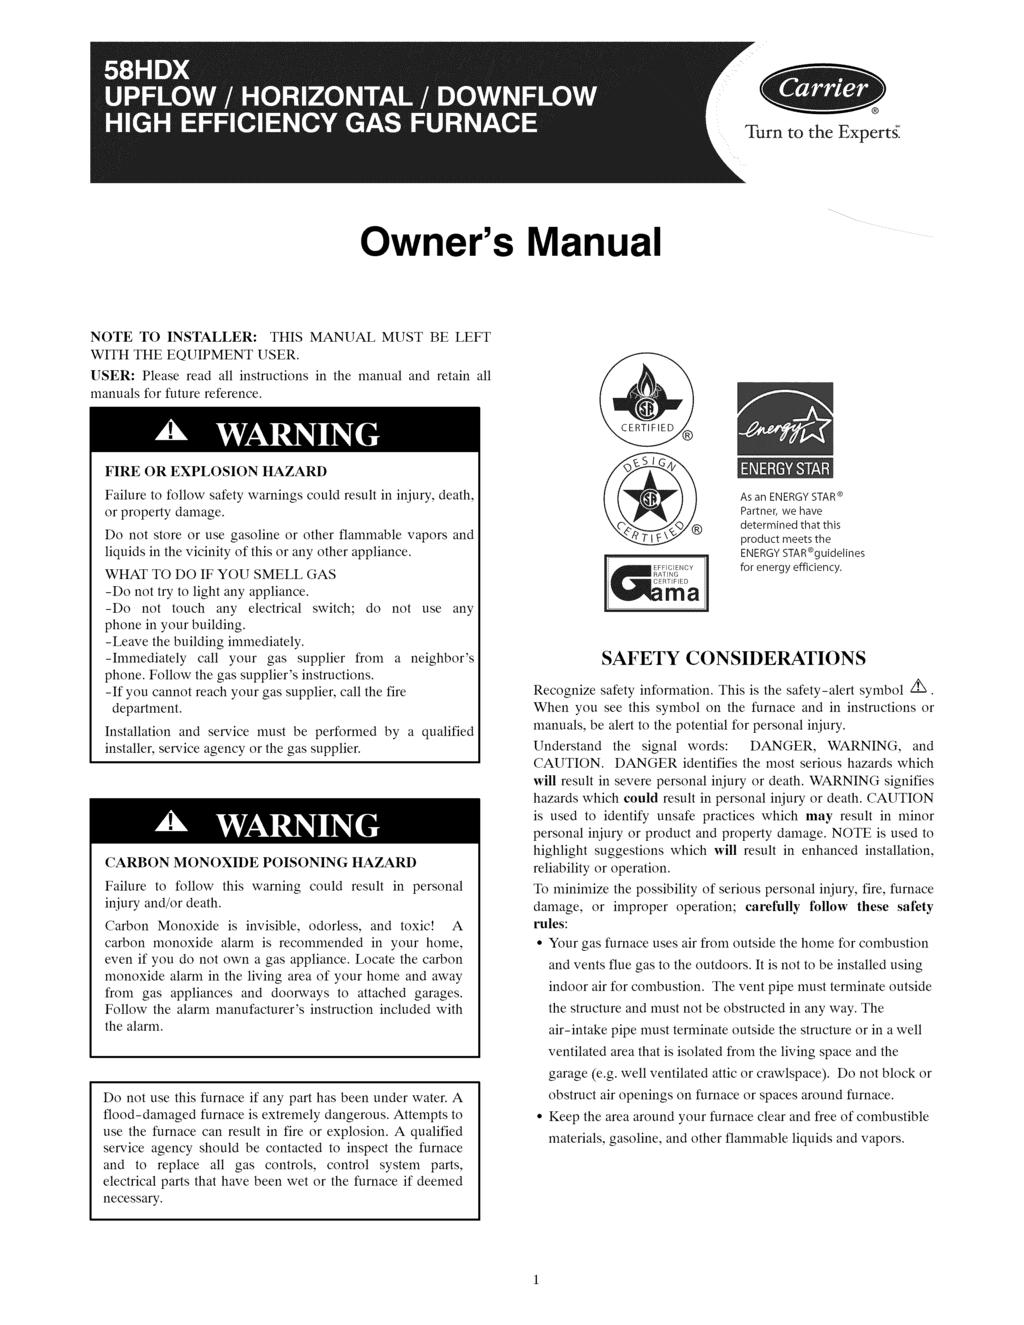 Irn to the Expertg Owner's Manual NOTE TO INSTALLER: THIS MANUAL MUST BE LEFT WITH THE EQUIPMENT USER. USER: Please read all instructions in the manual and retain all manuals for future reference.